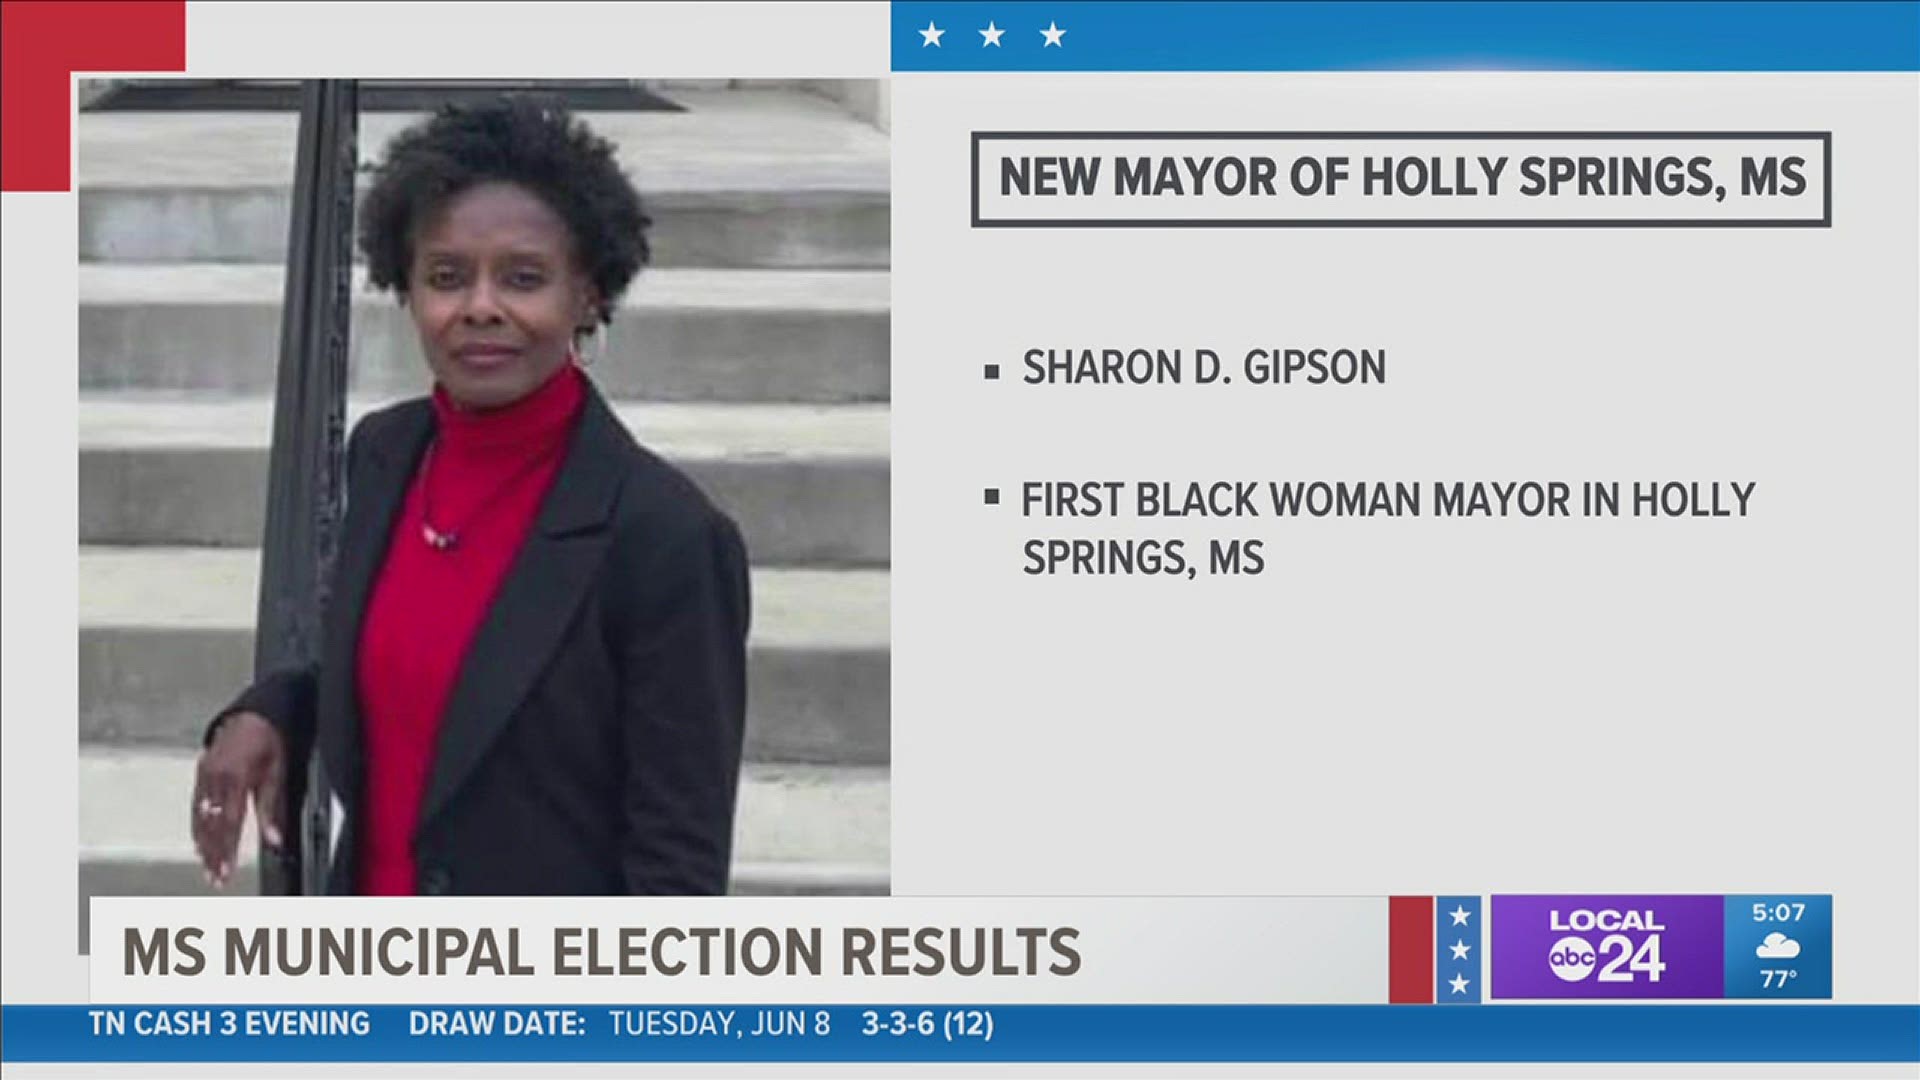 Among the winners was attorney Sharon D. Gipson, who was elected as Holly Springs' first Black woman mayor.